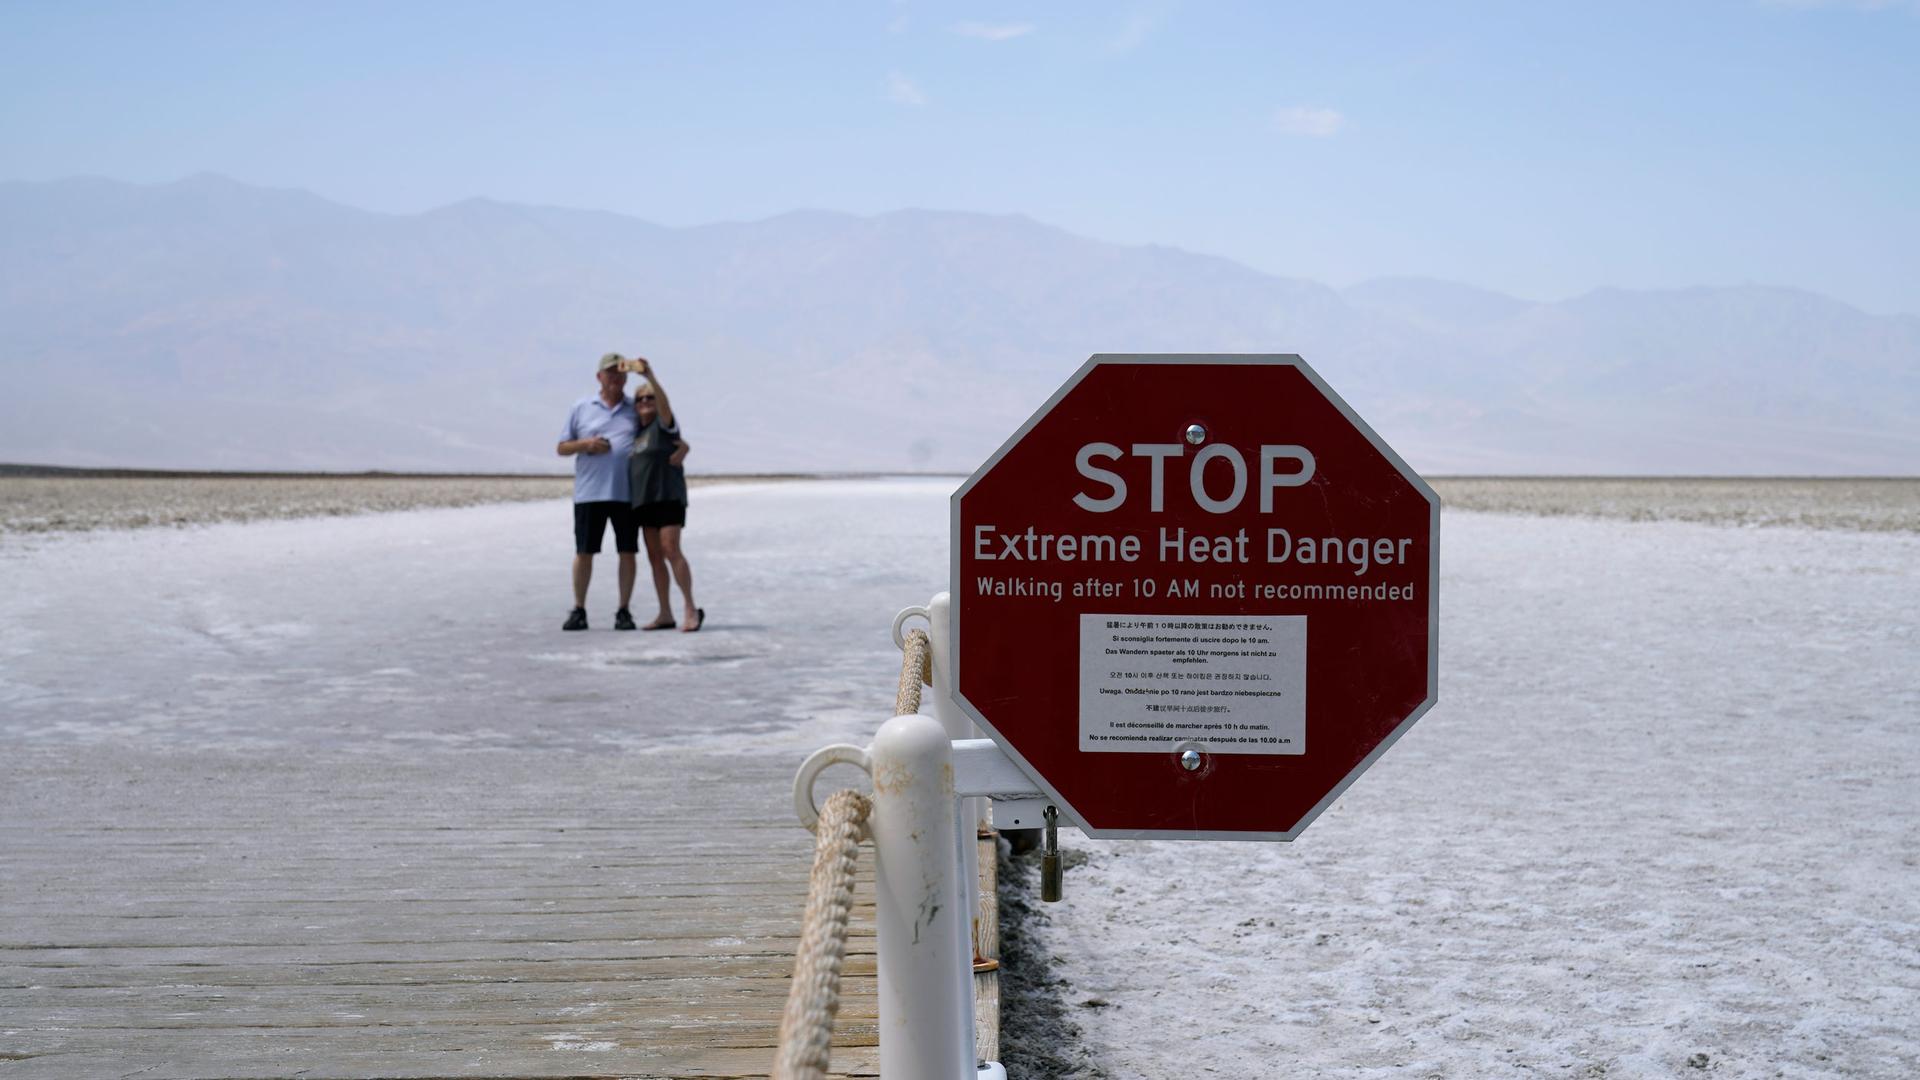 A sign the shape of a red stop sign warns of extreme heat danger at Badwater Basin with a couple taking a selfie in the distance.